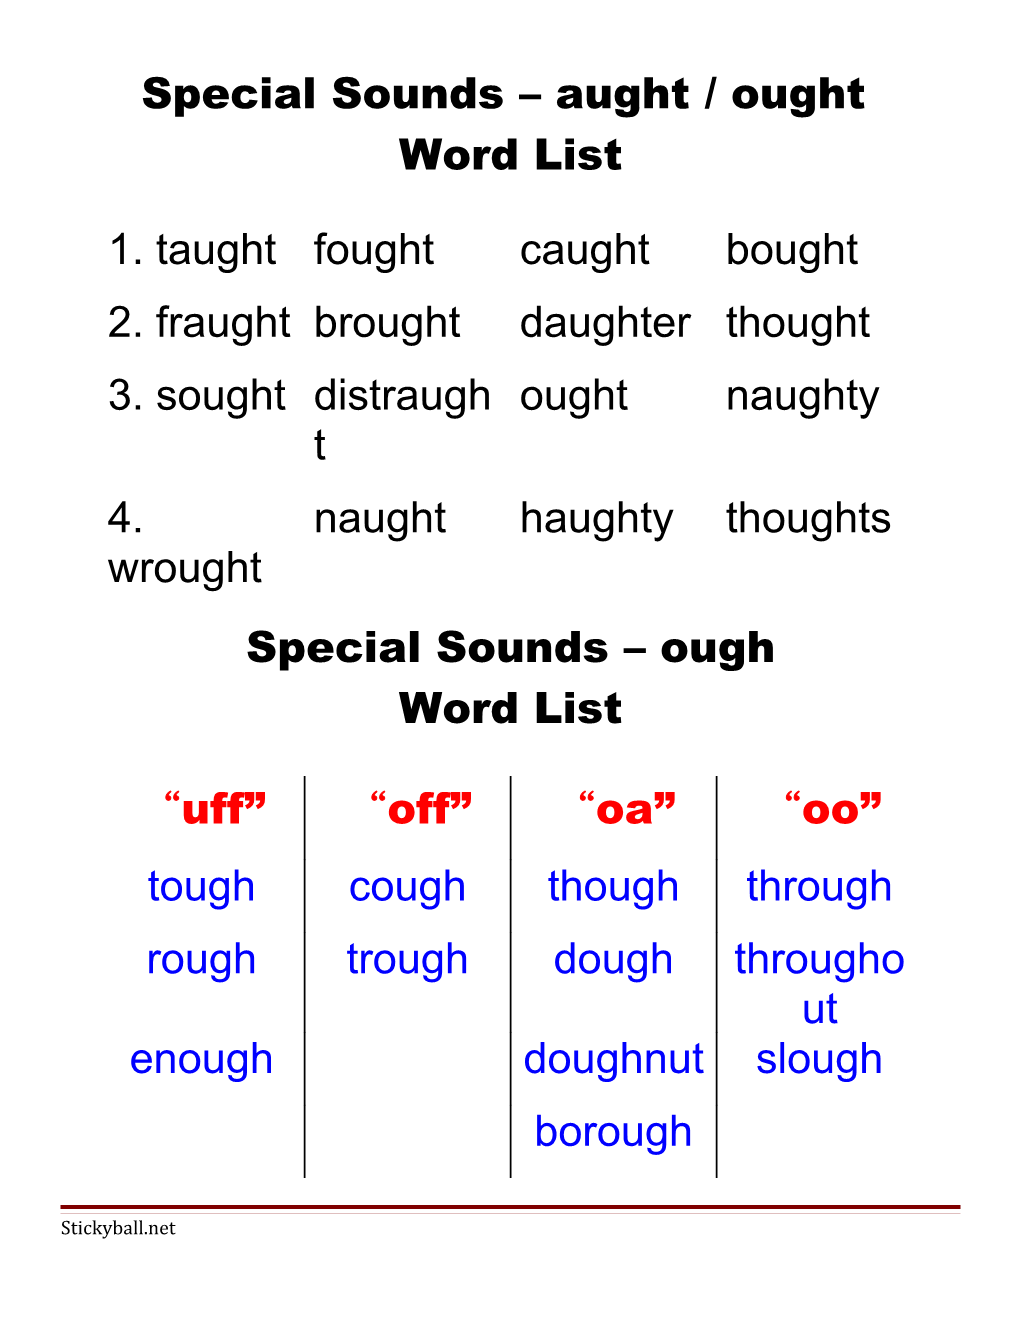 There Are Many Ways to Pronounce Ough. Here Are 4 of the Most Common